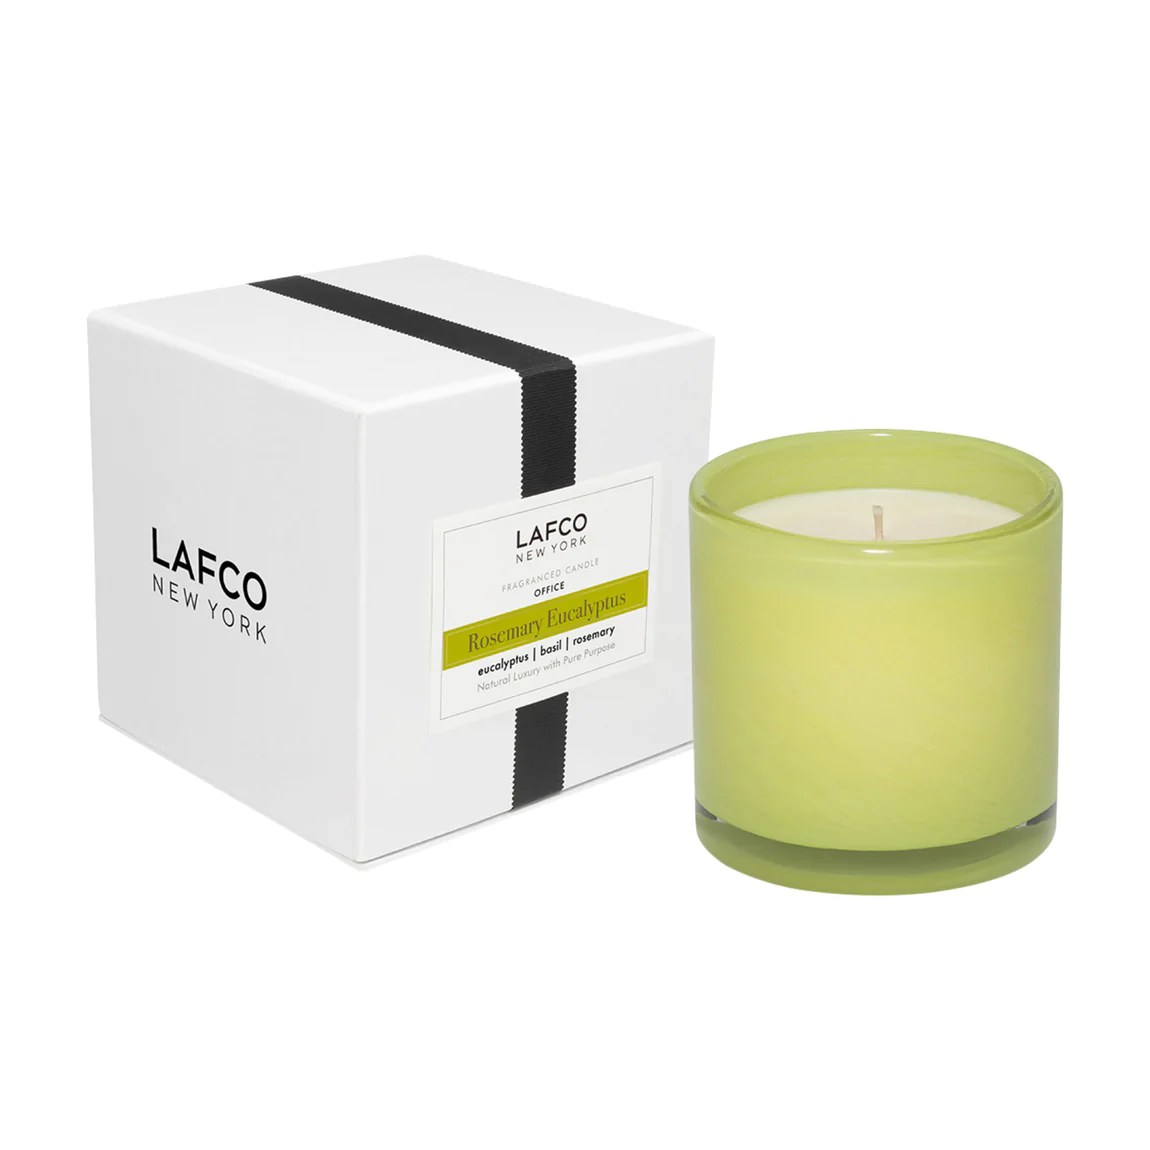 lafco rosemary candle next to the box